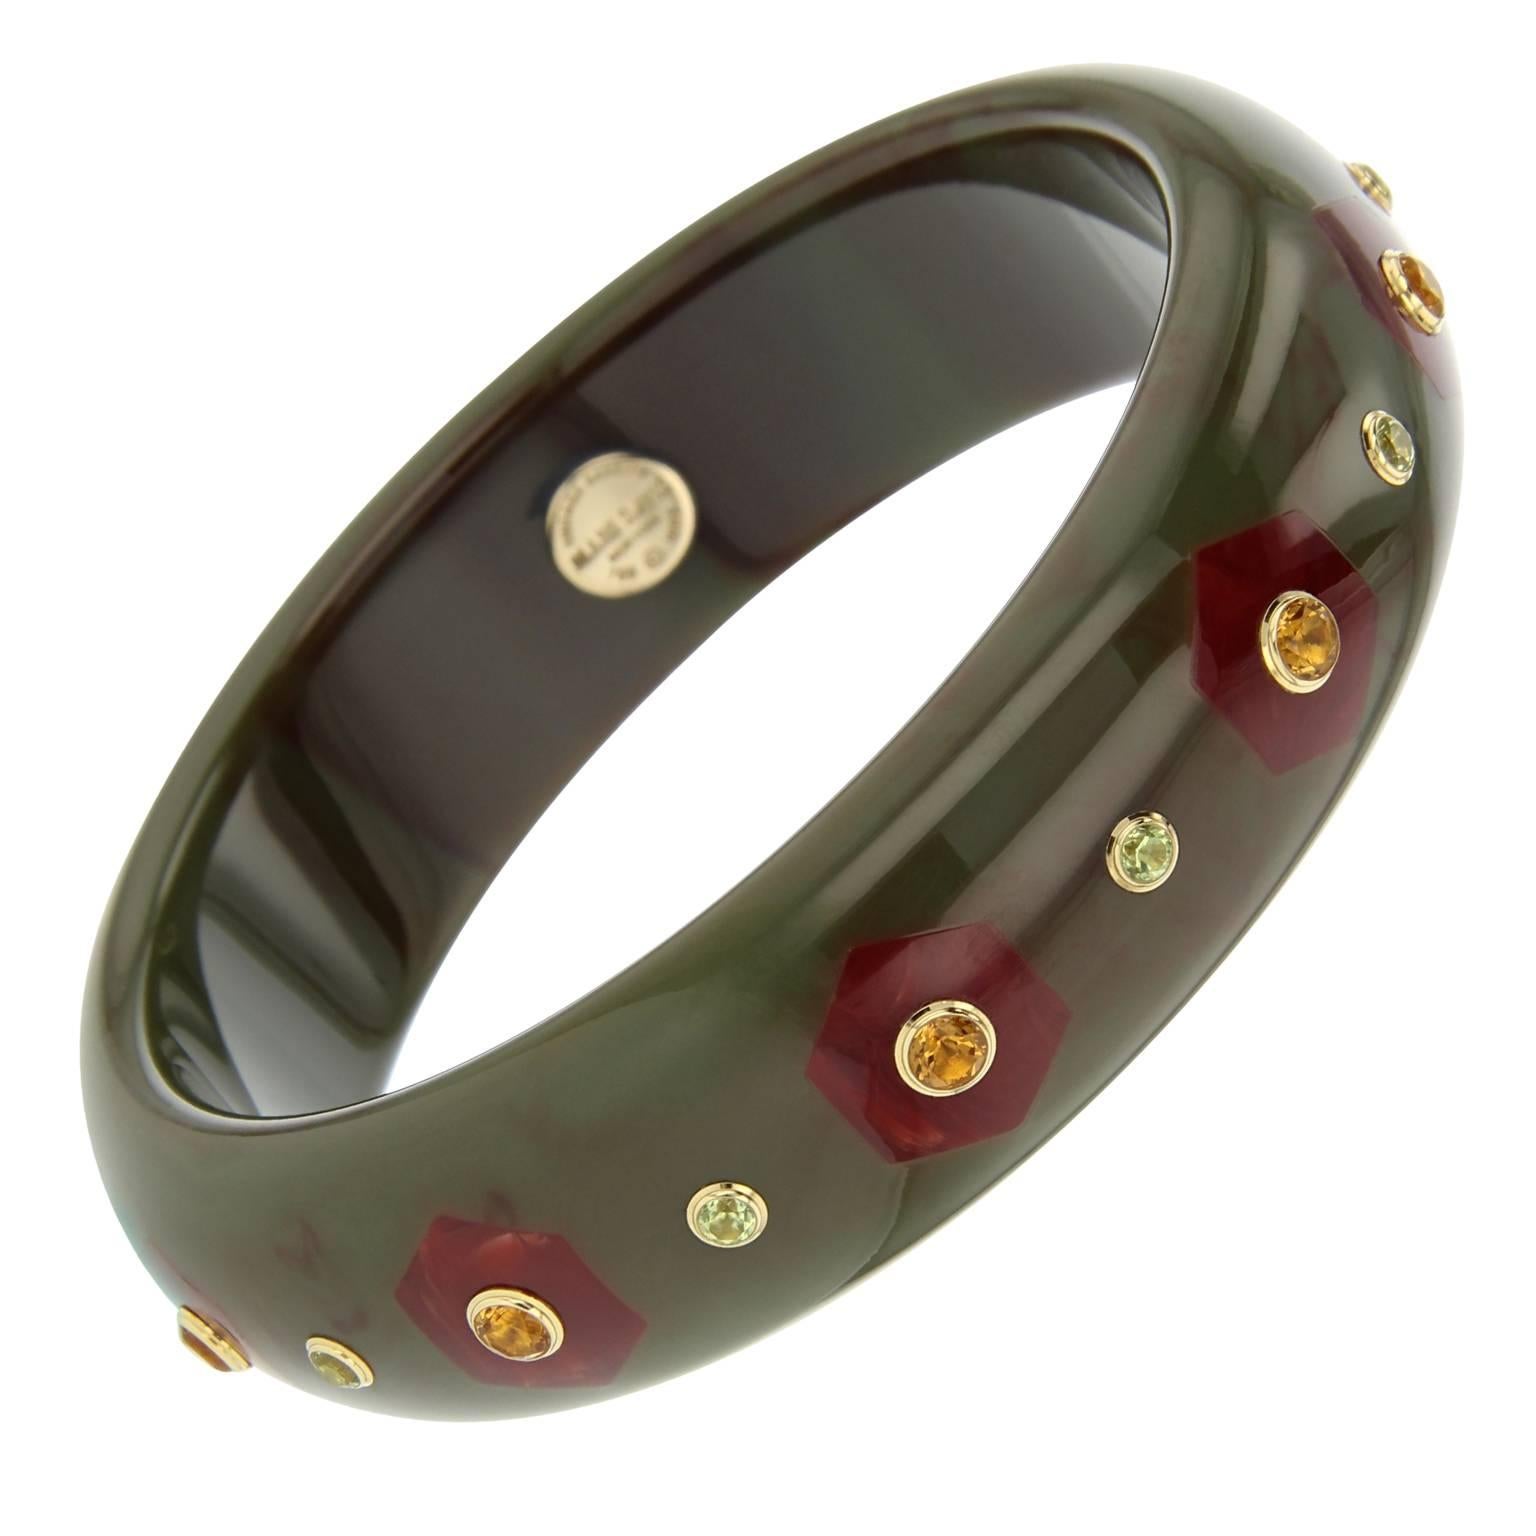 This Mark Davis bangle was handcrafted using olive green vintage bakelite and meticulously inlayed with hexagonal shaped pieces of burgundy bakelite. Each hexagon is centered with a citrine and in between is a peridot, bezel-set in 18k yellow gold.